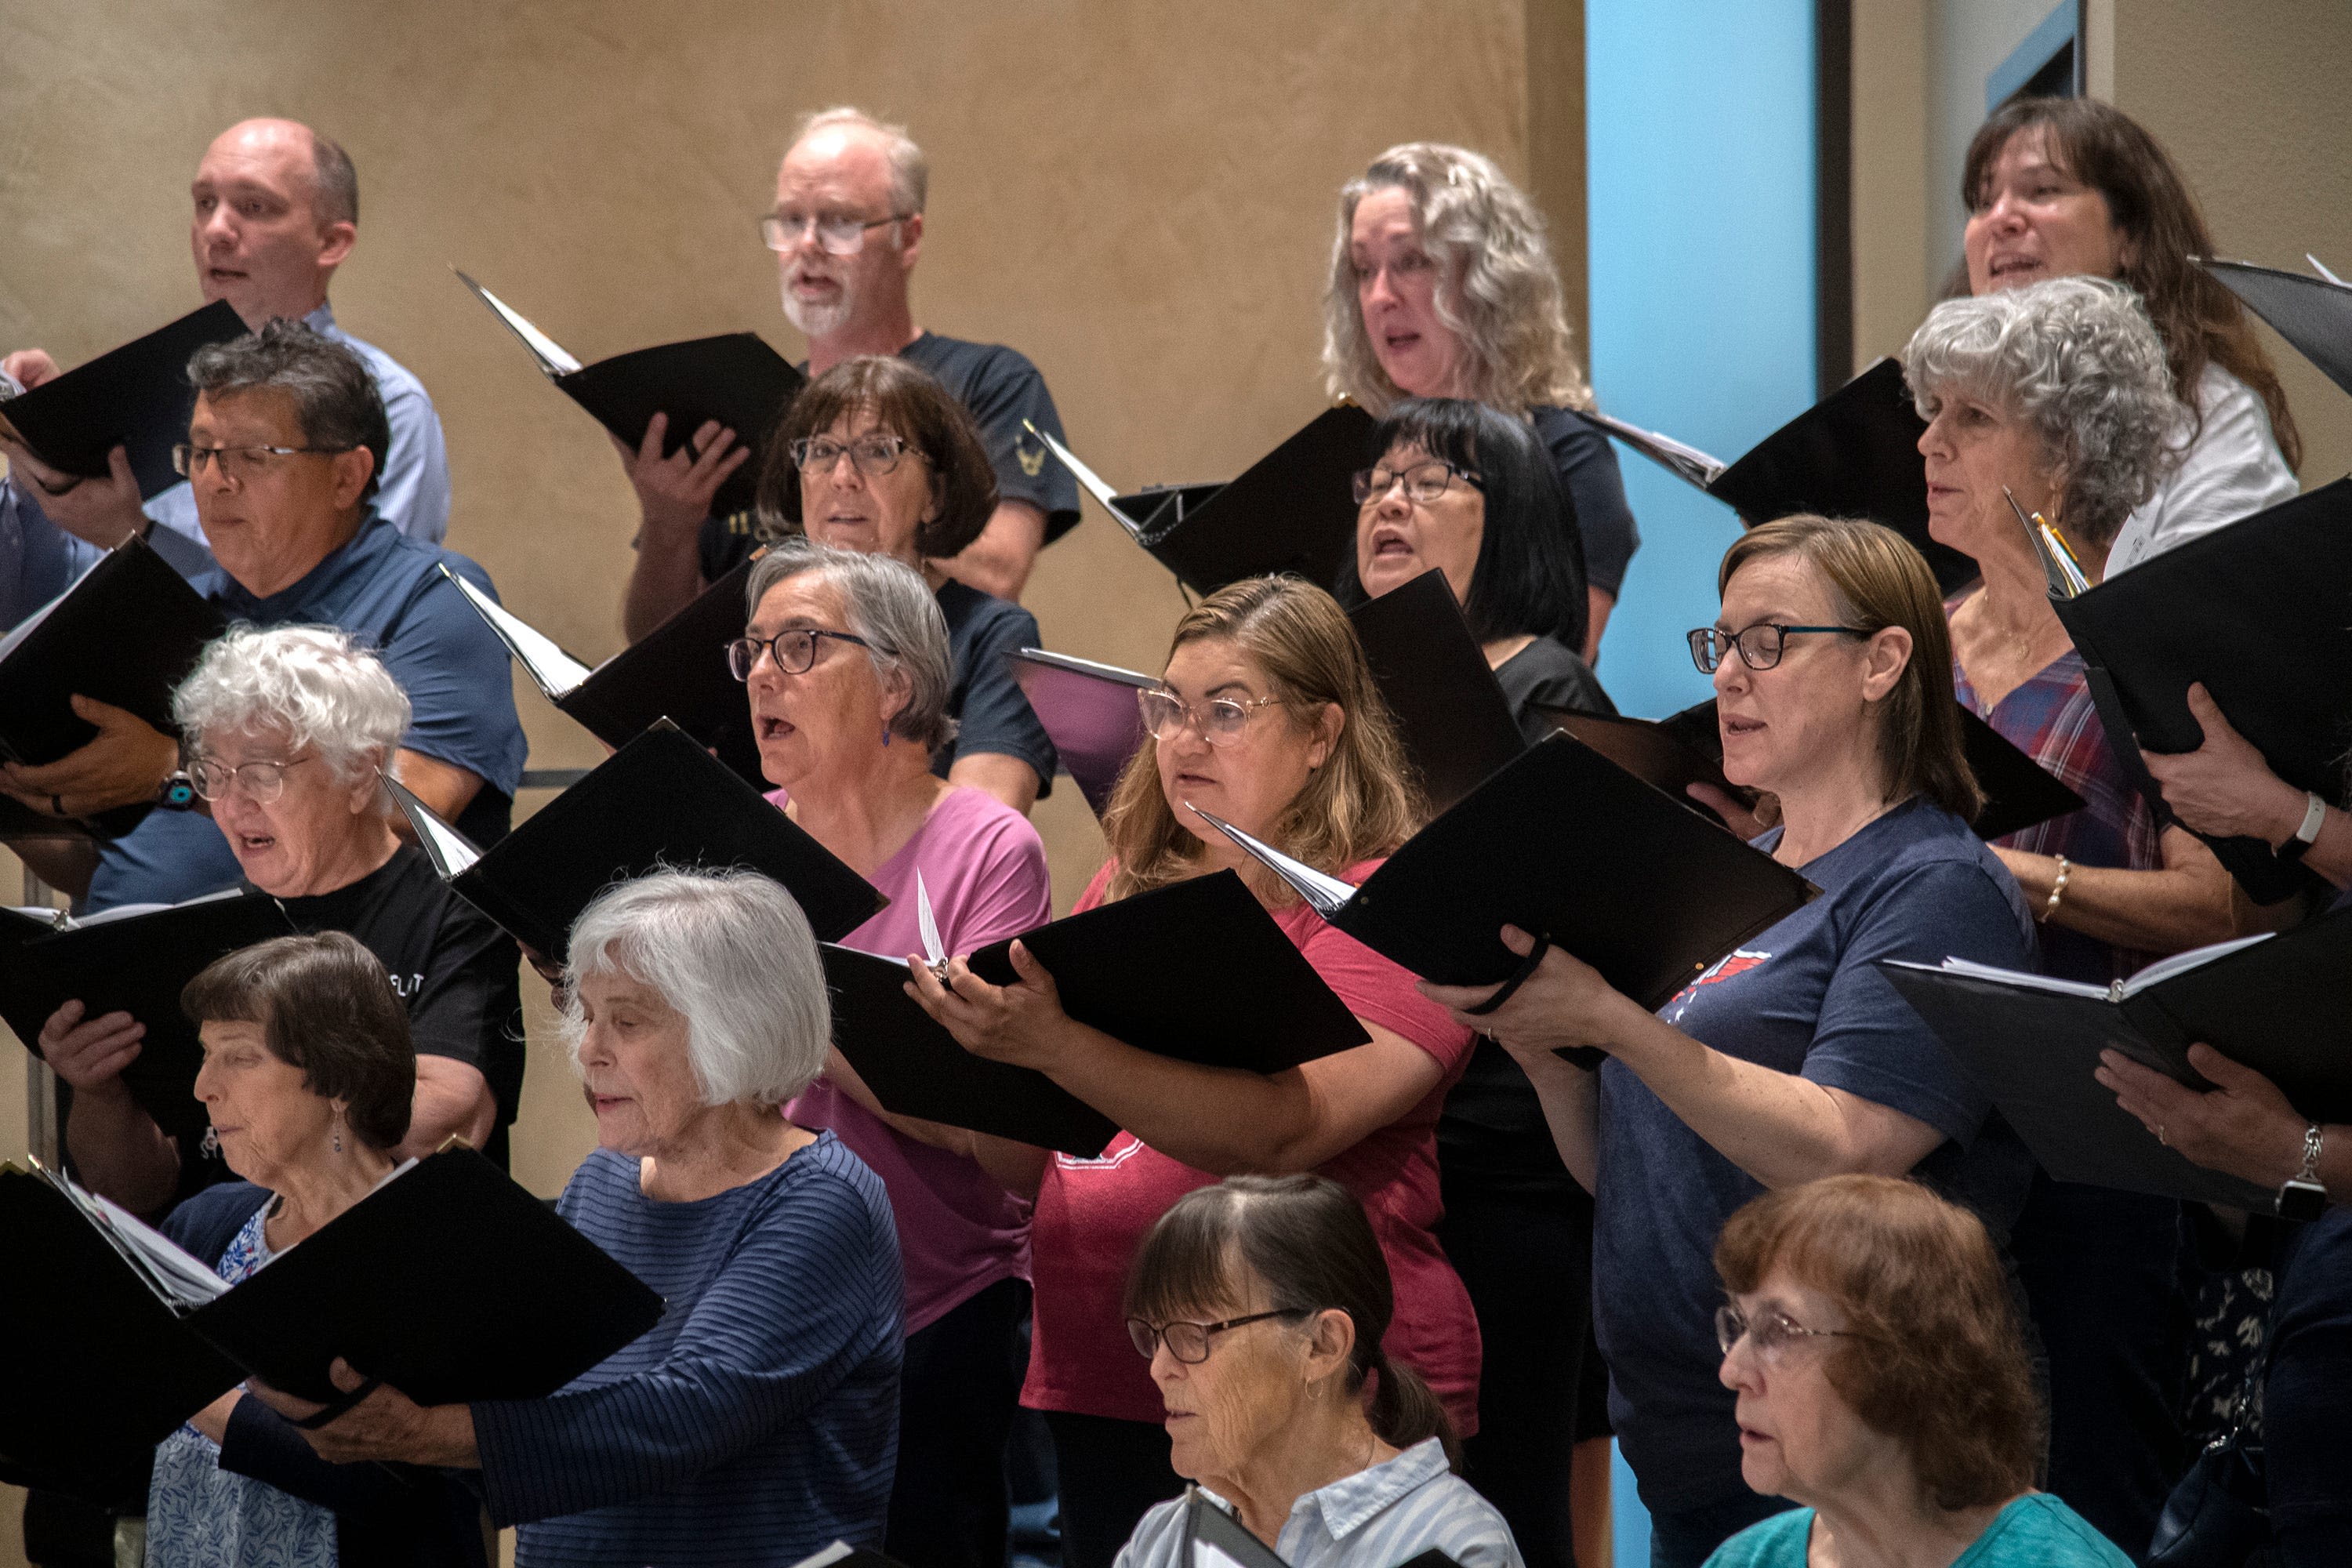 'Fun, engaging, and maybe surprising': Stockton Chorale prepares for final concert of season